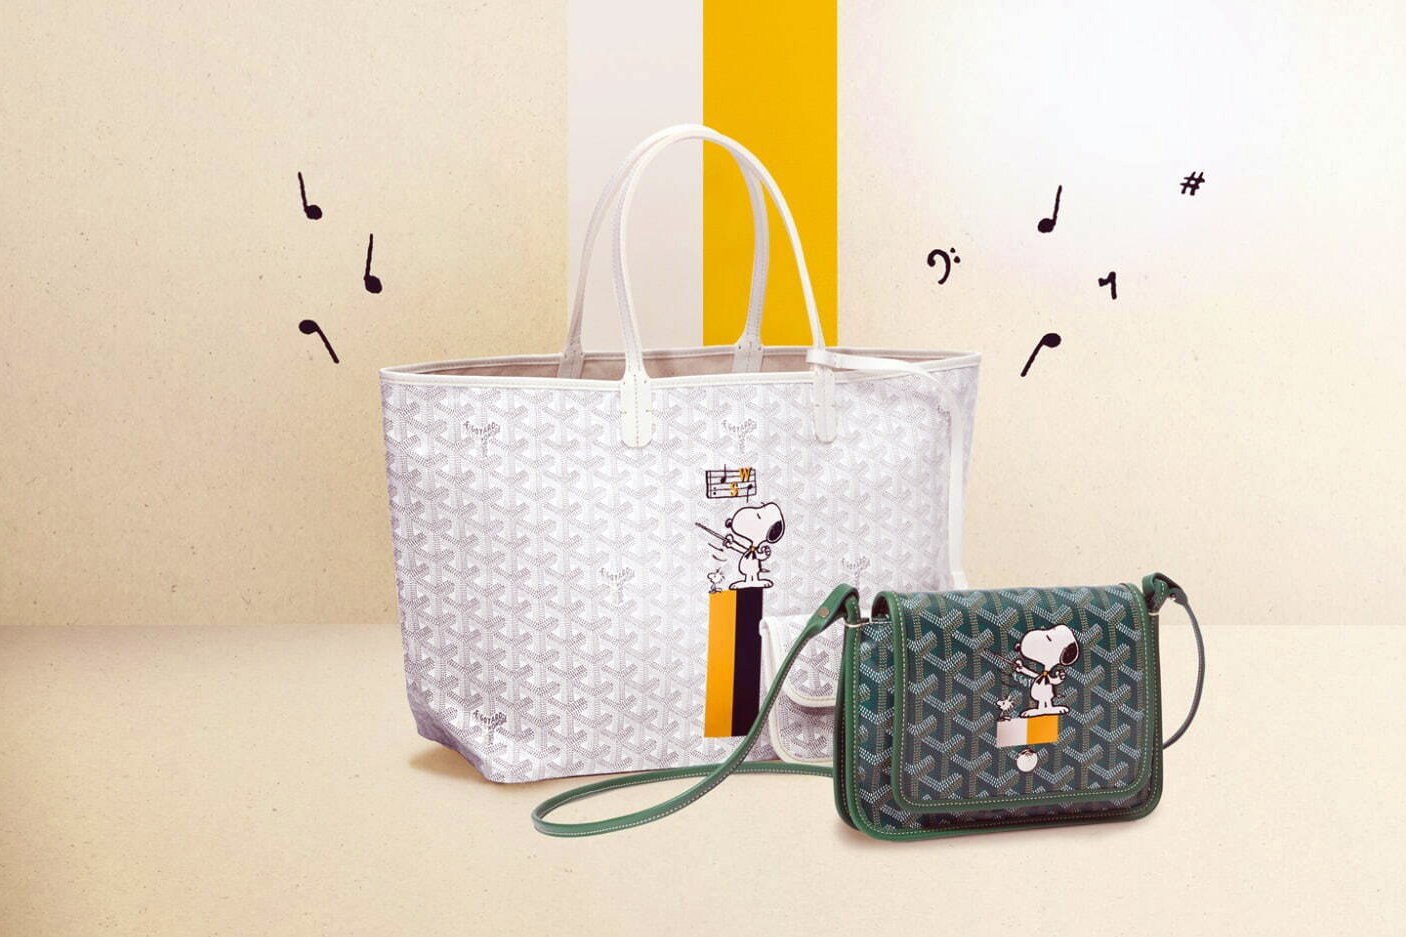 Thoughts on Goyard bags? I found this one at a bargain price but